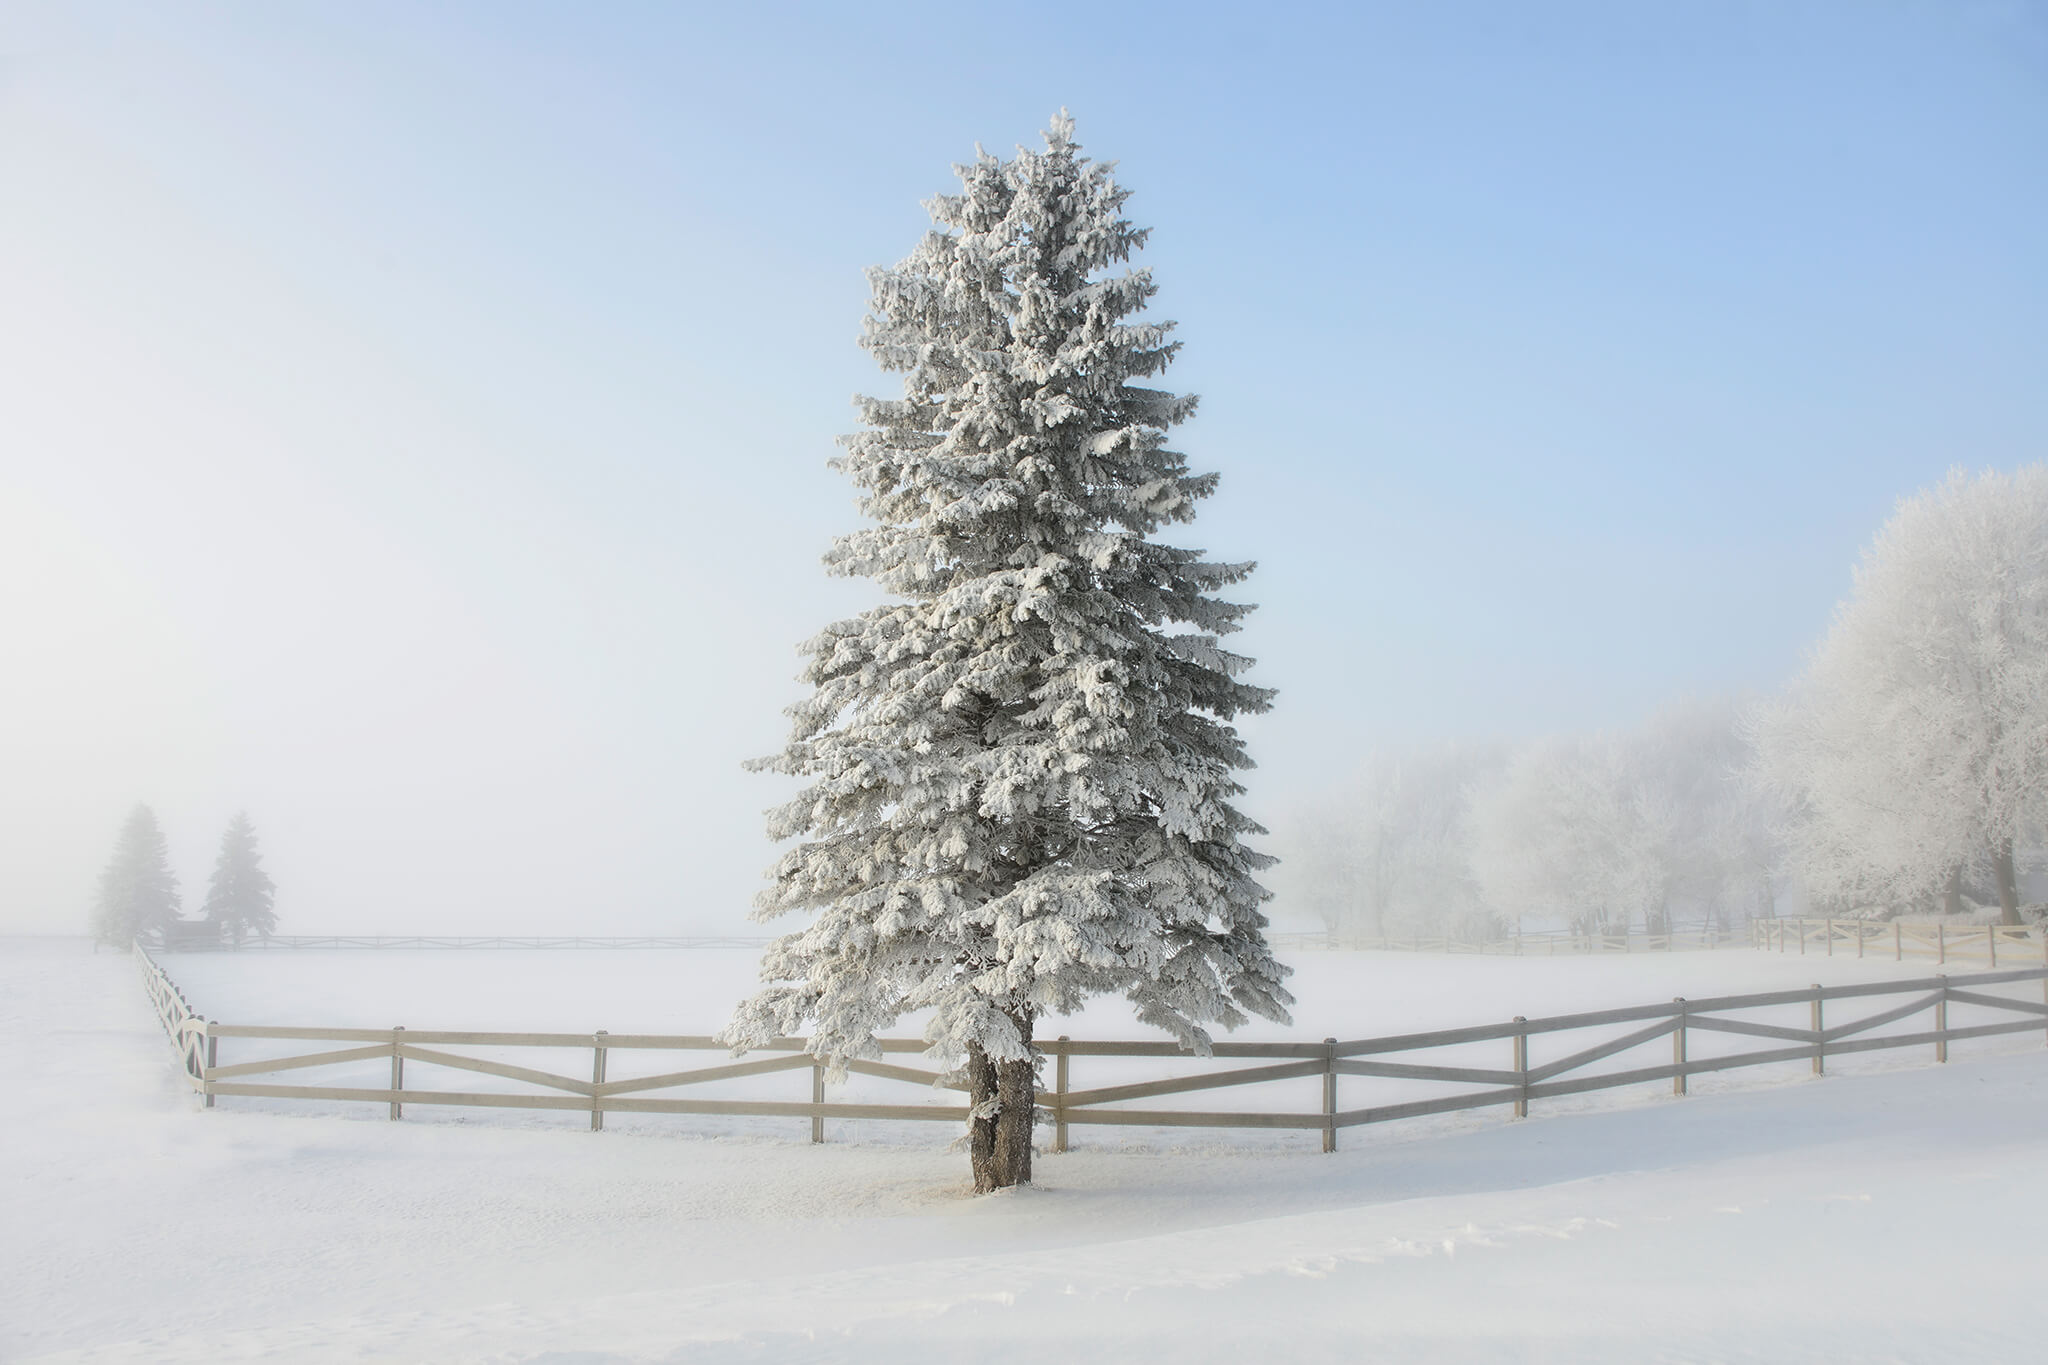 Frosted Tree & Fence